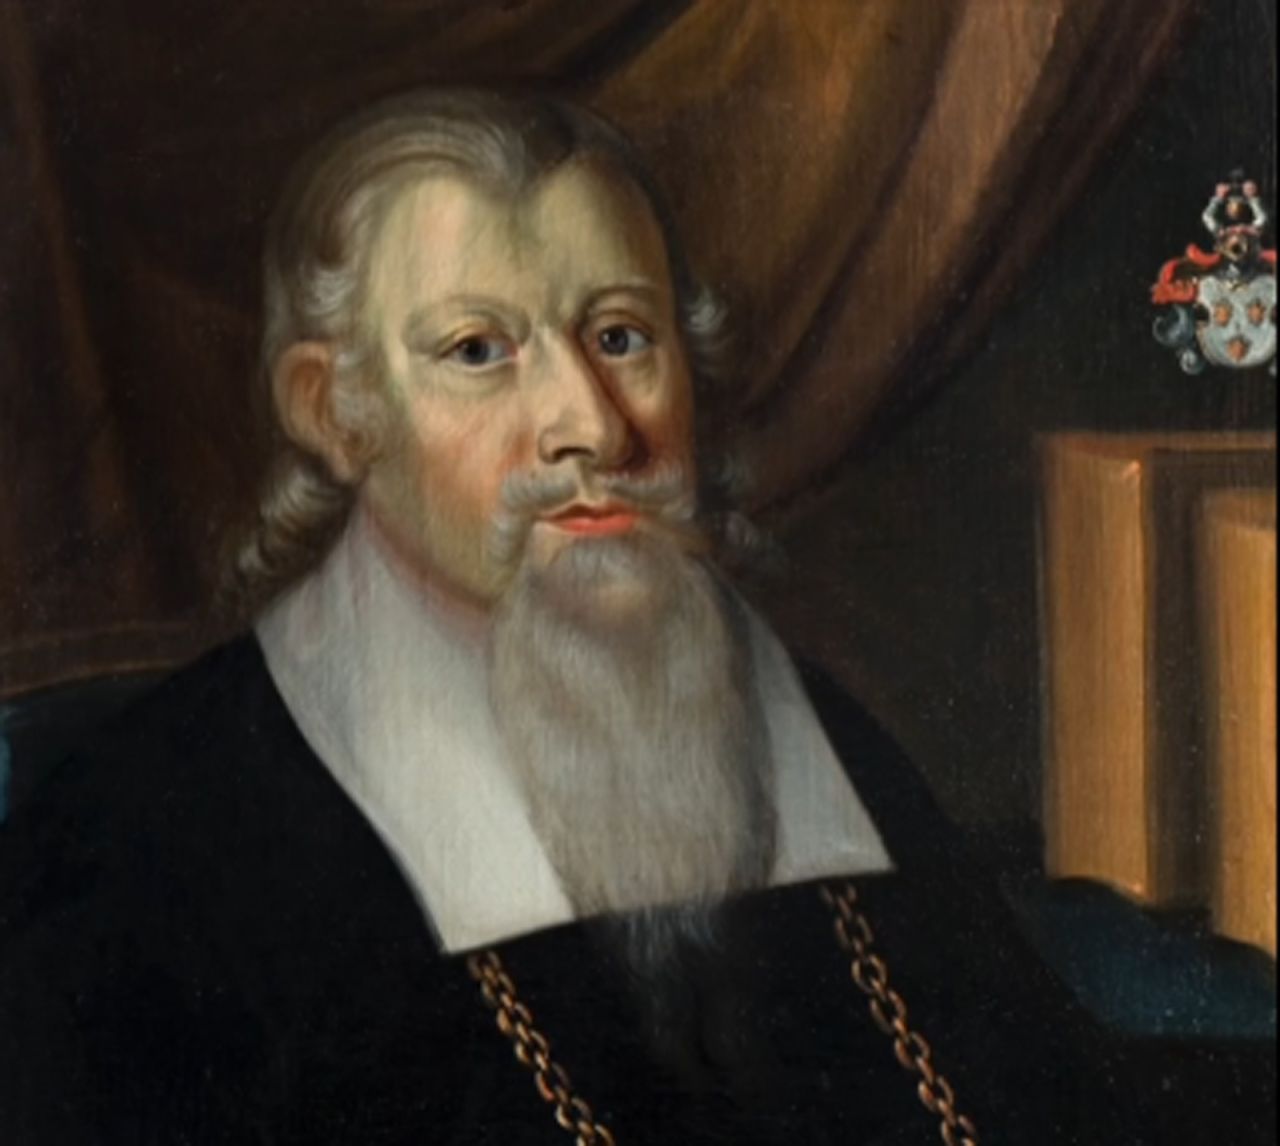 Bishop Winstrup was one of the founders of Lund University, which carried out the research.